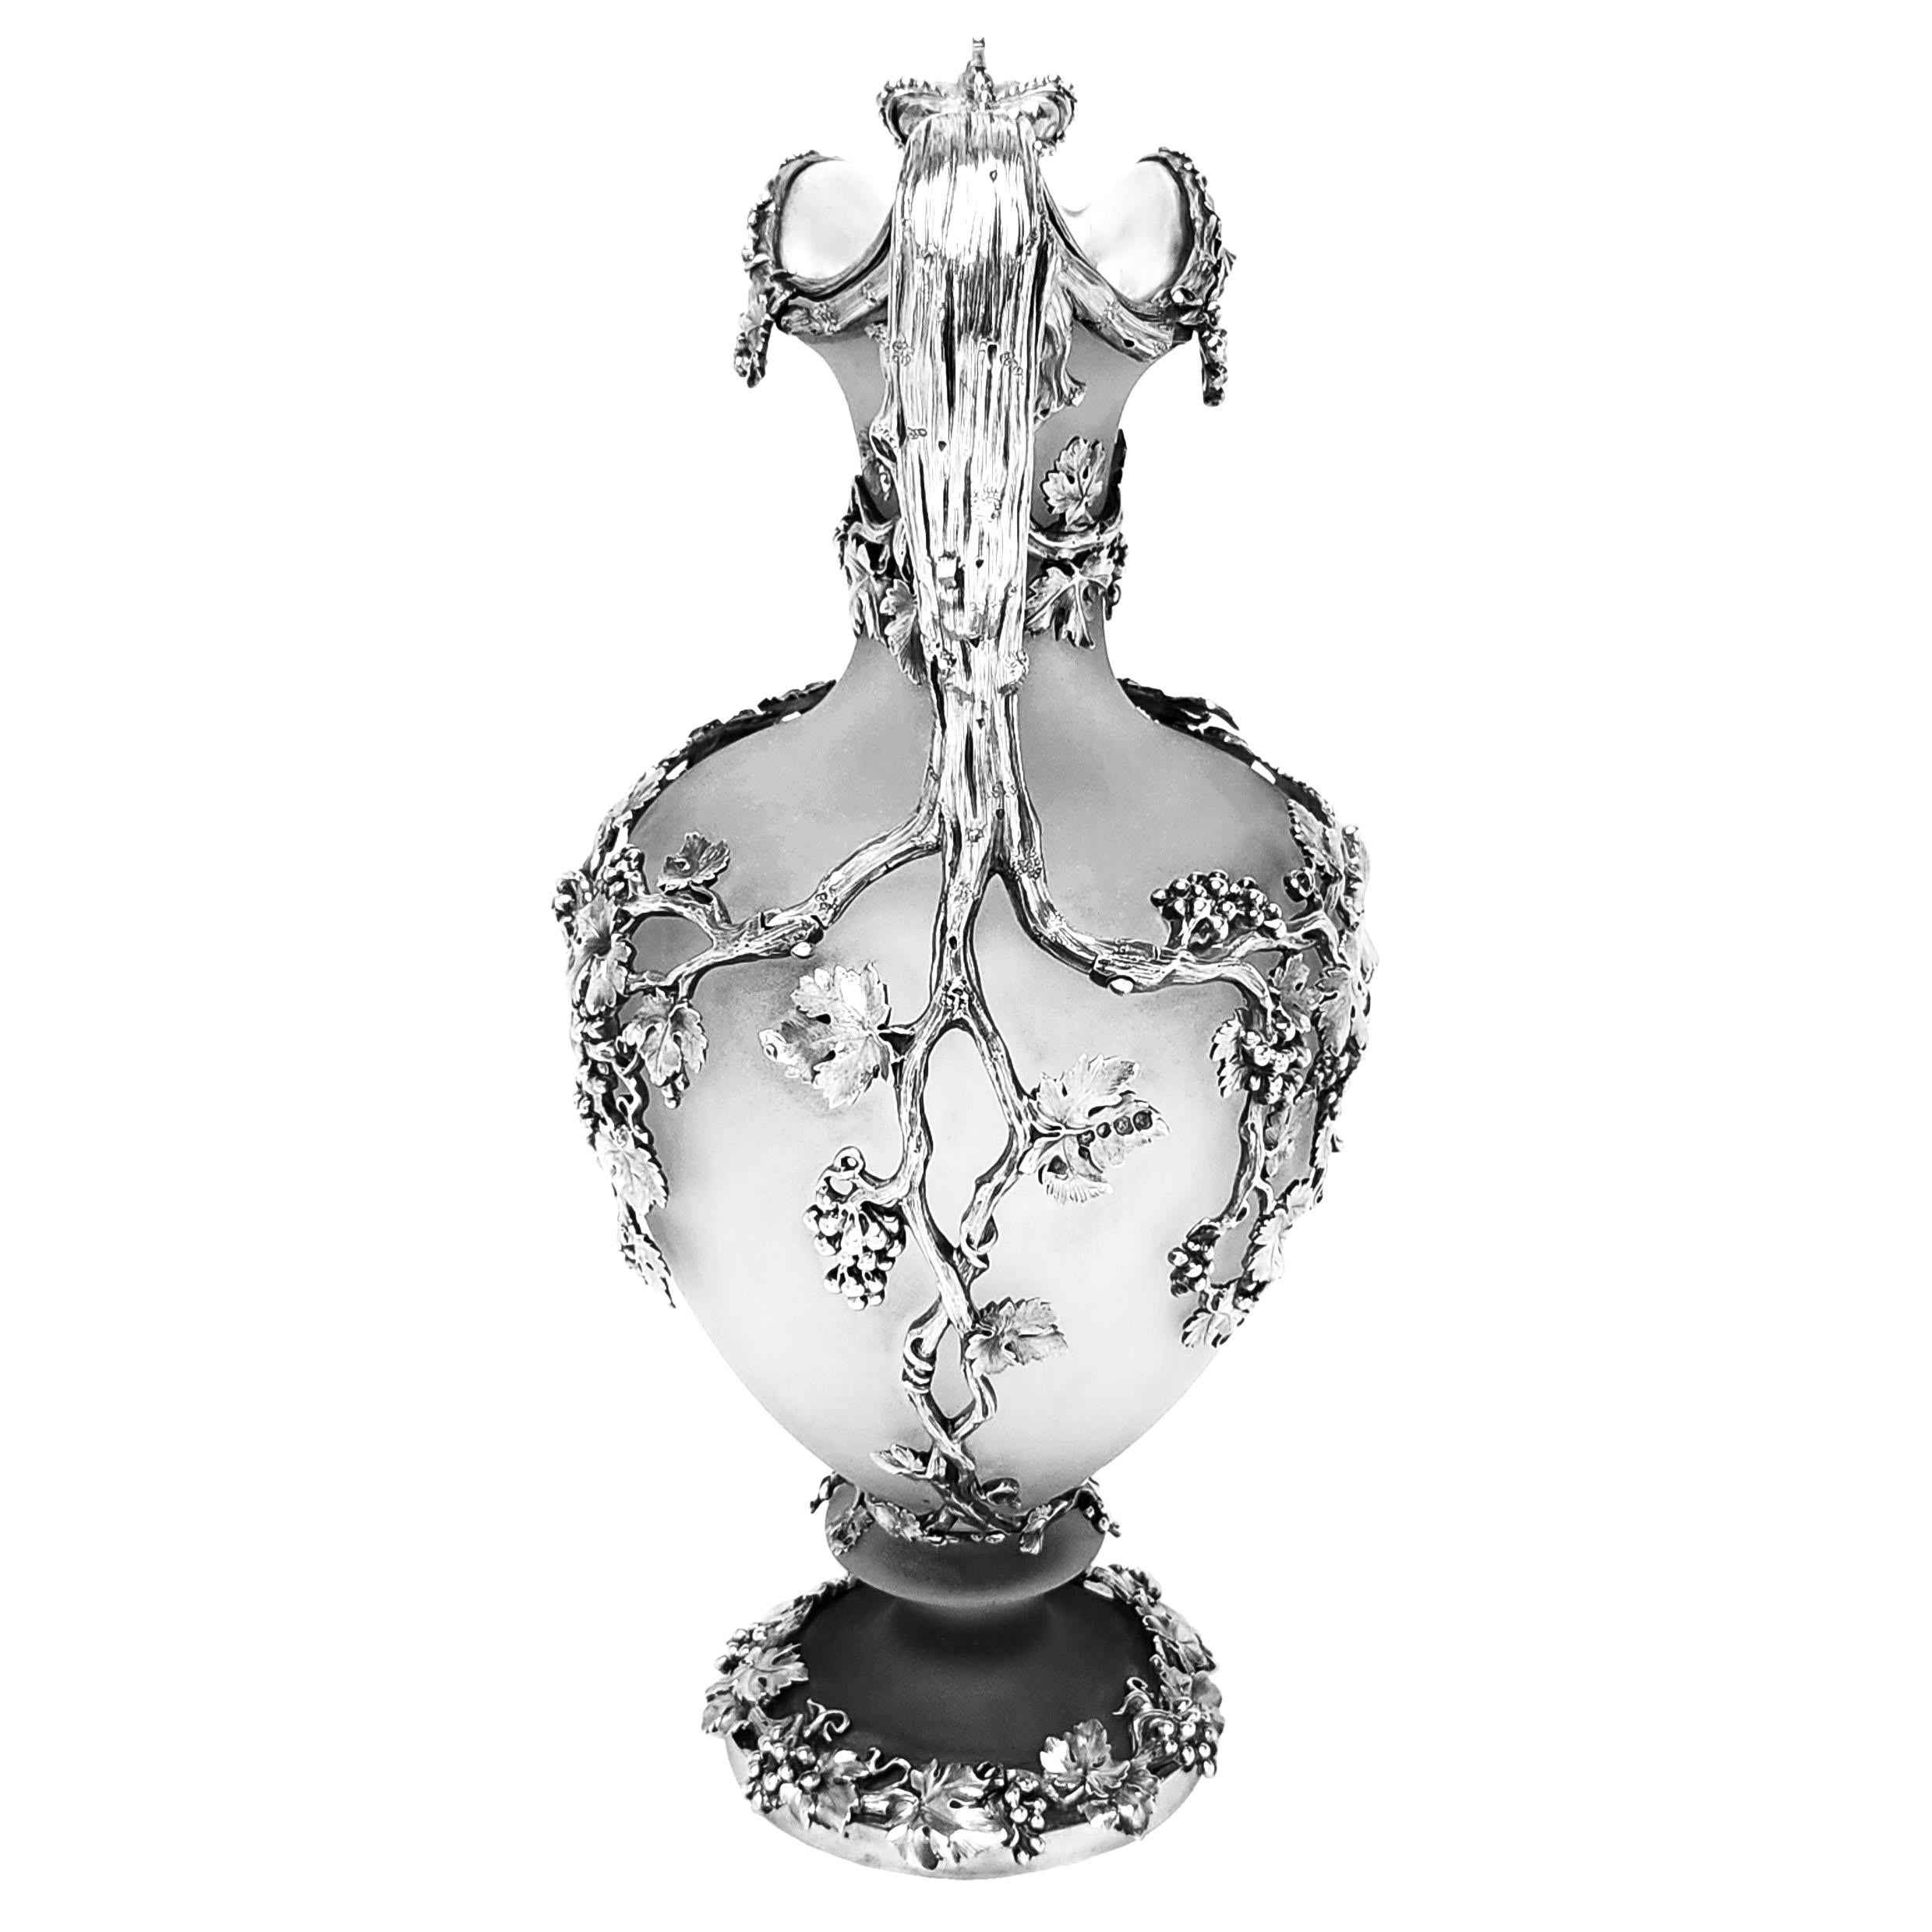 19th Century Large Antique Silver & Glass Claret Jug / Wine Ewer London, England 1843 For Sale